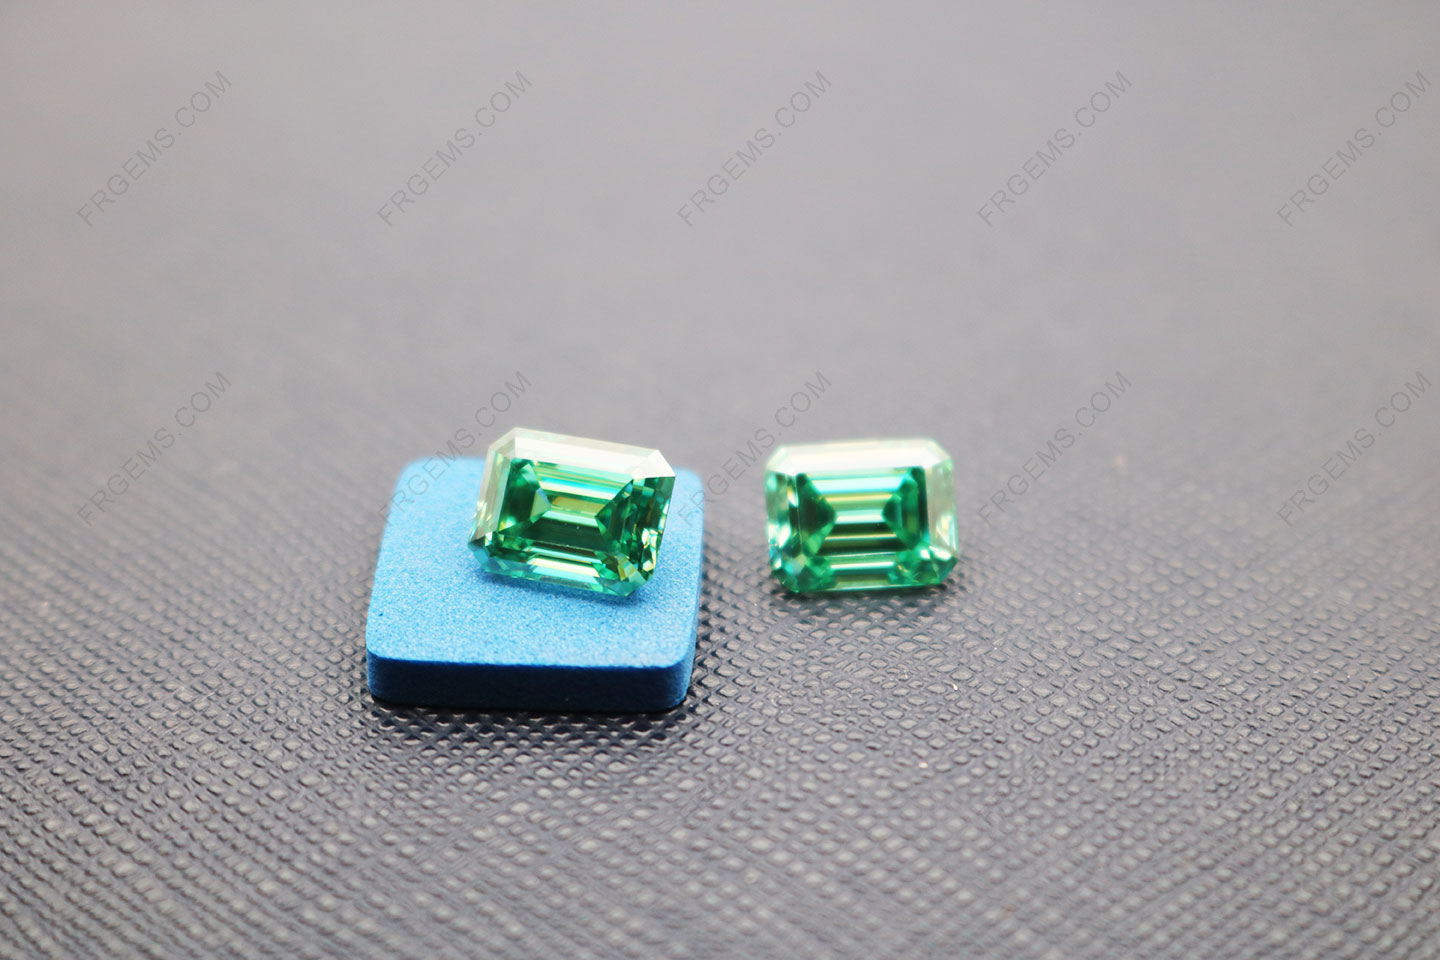 Loose Moissanite Green Color Octagon Shape Emerald Cut 9x7mm 3ct weight gemstones wholesale